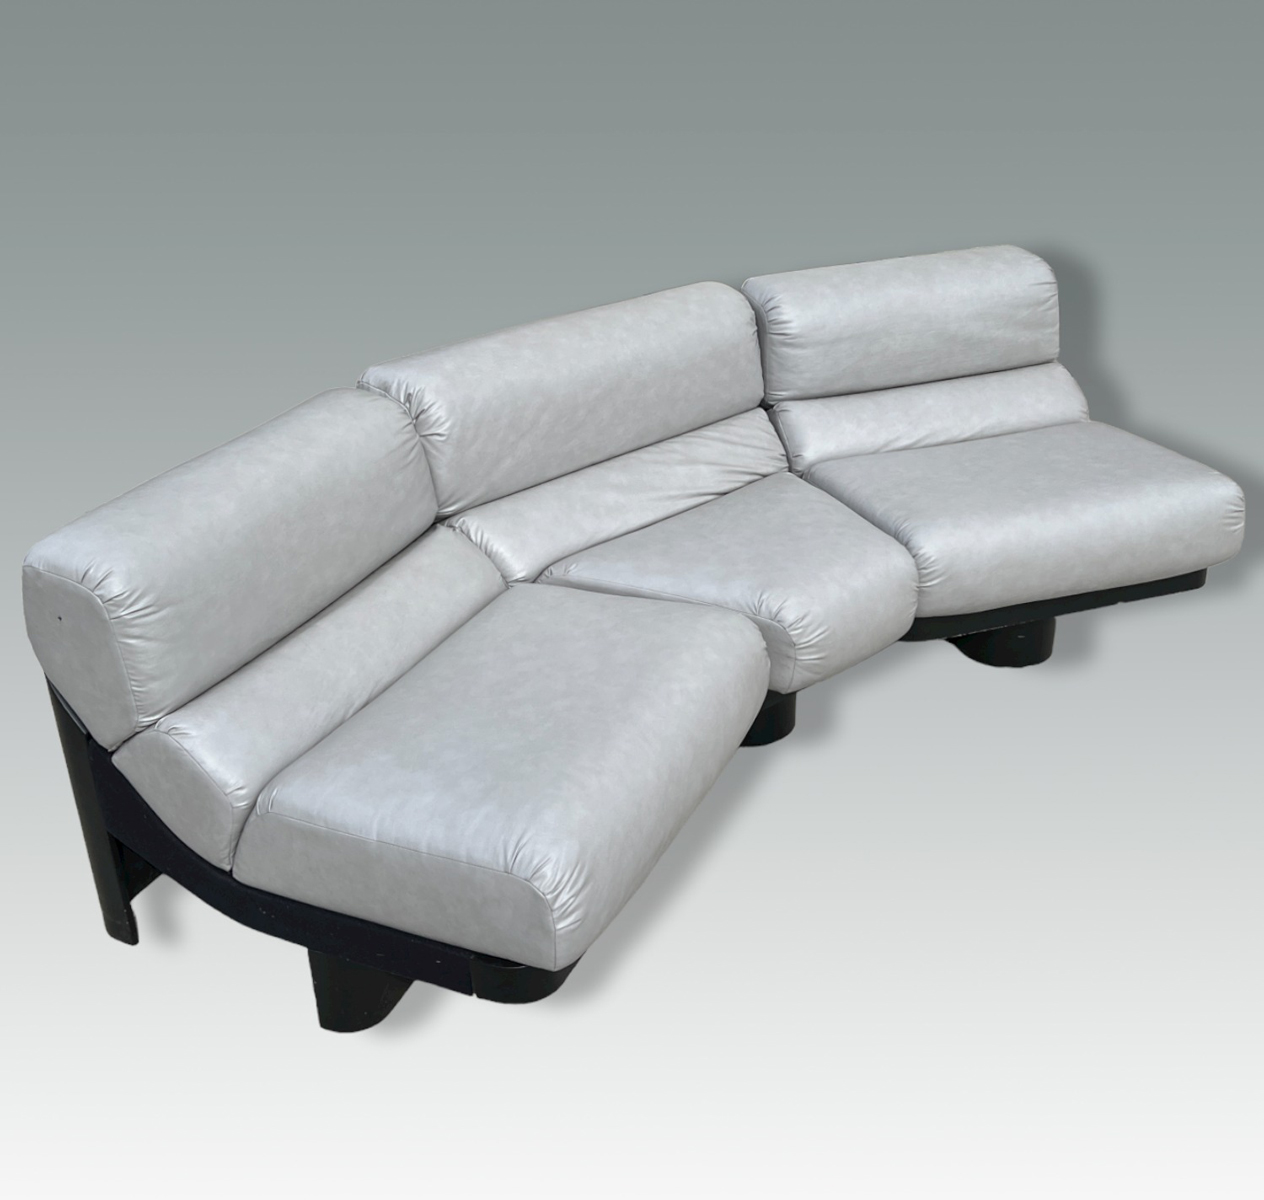 3 PC. MODERN SECTIONAL FAUX LEATHER